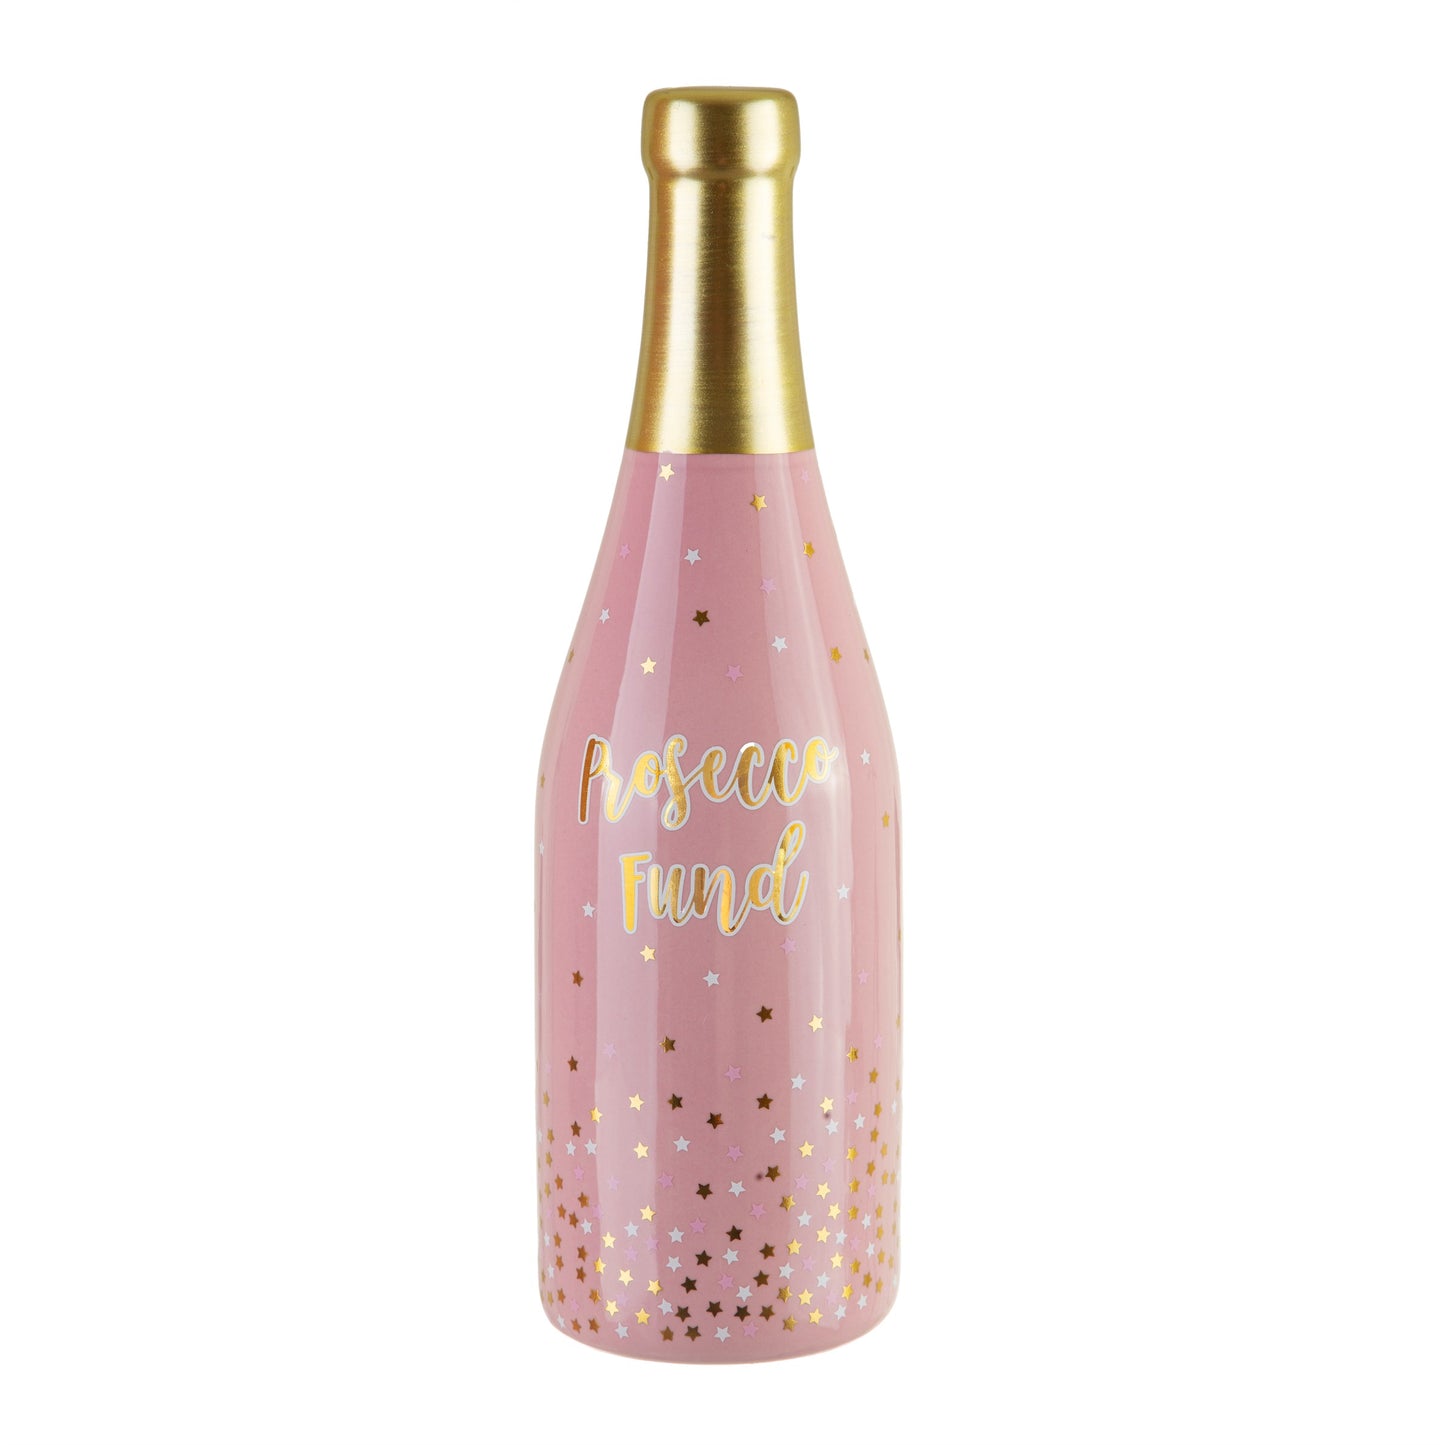 A pretty pink money bank in the form of a prosecco bottle!